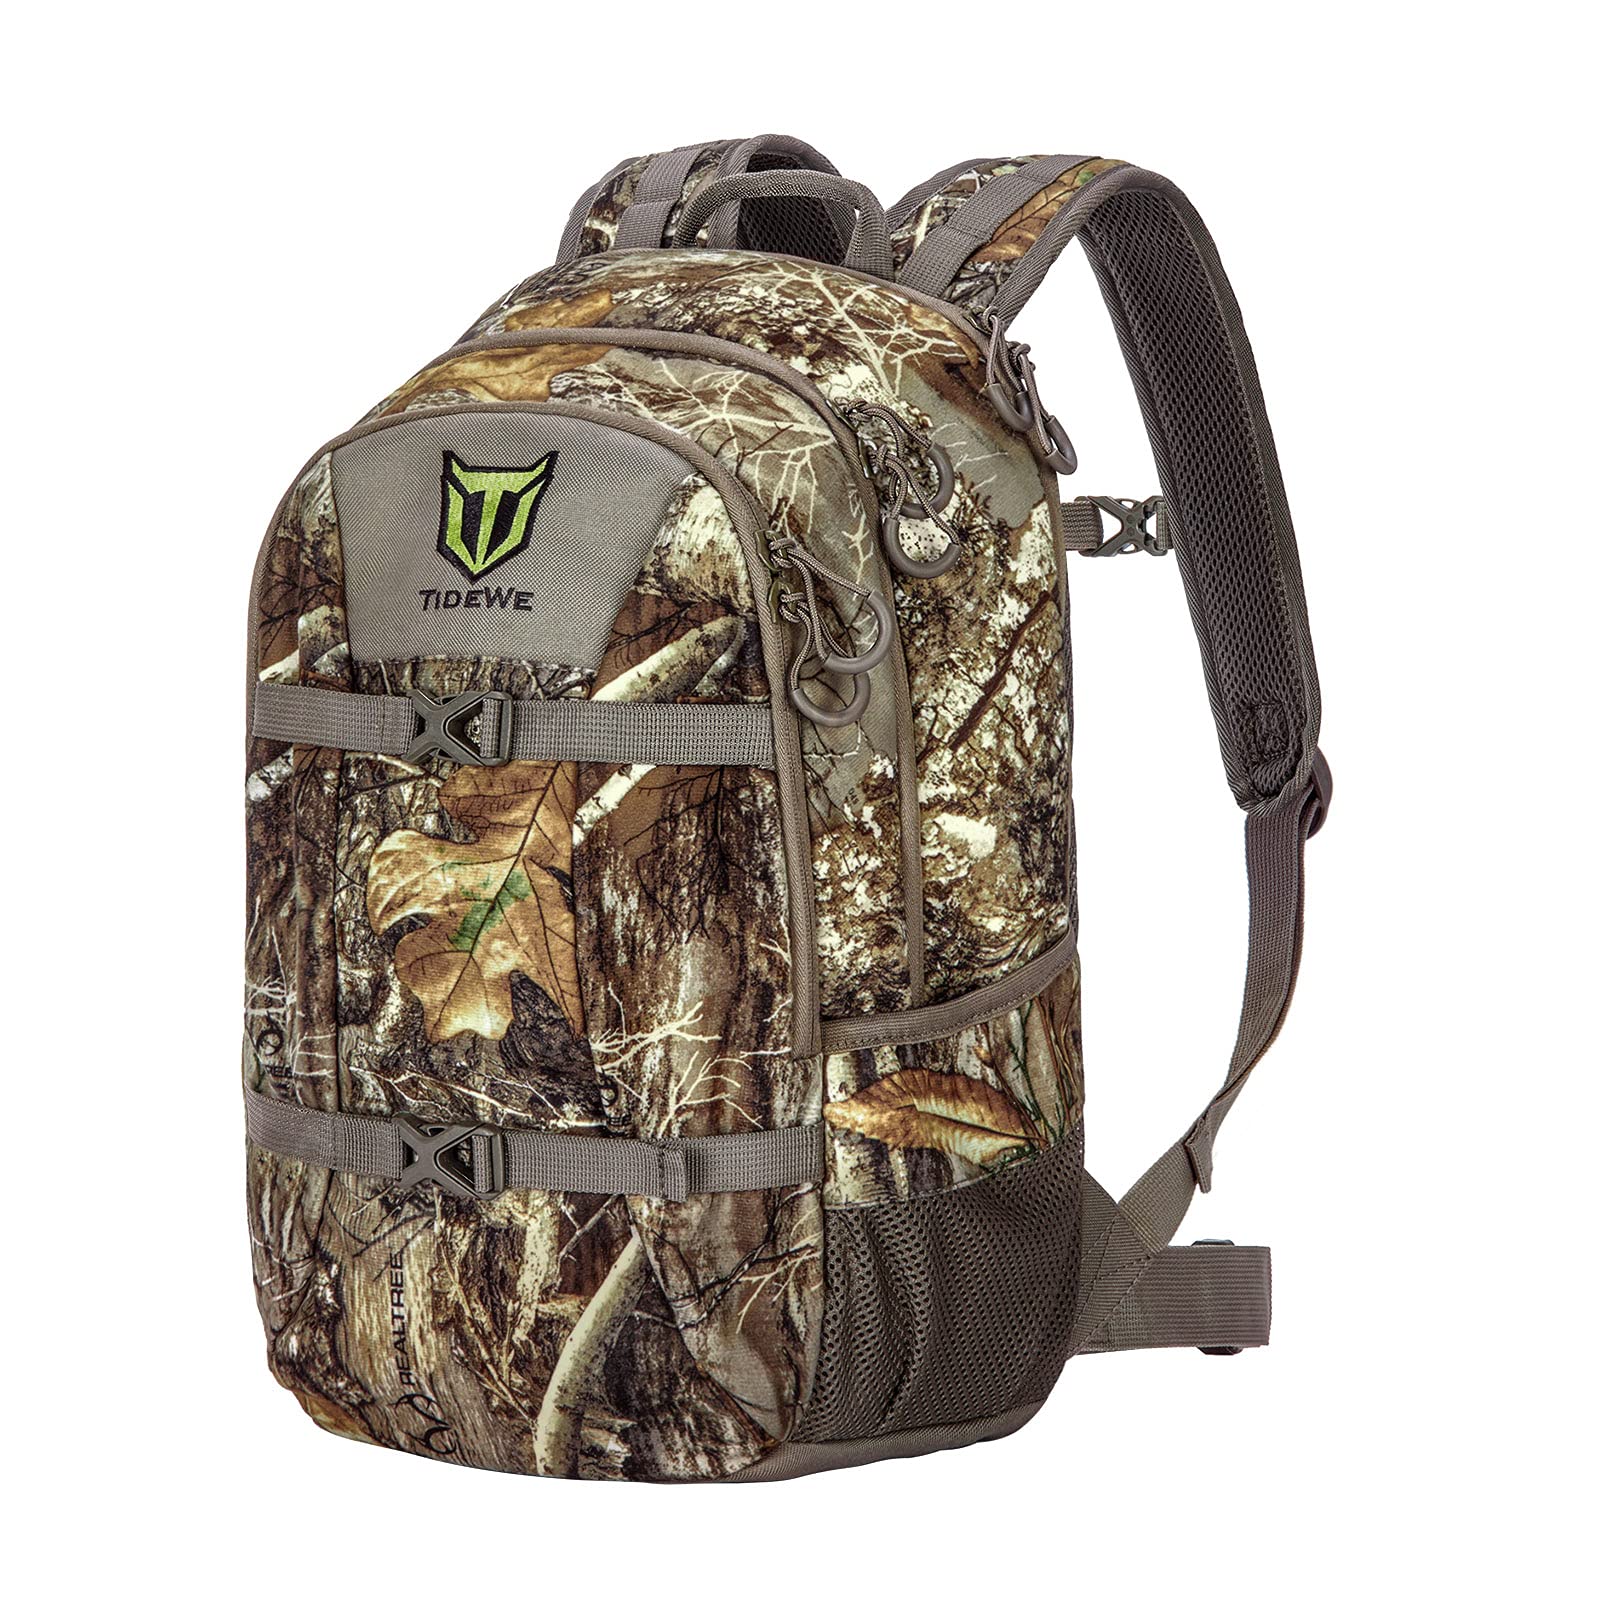 TIDEWE Hunting Backpack with Waterproof Rain Cover, 25L Realtree Edge Camo, Durable Day Pack for Bow Rifle Gun